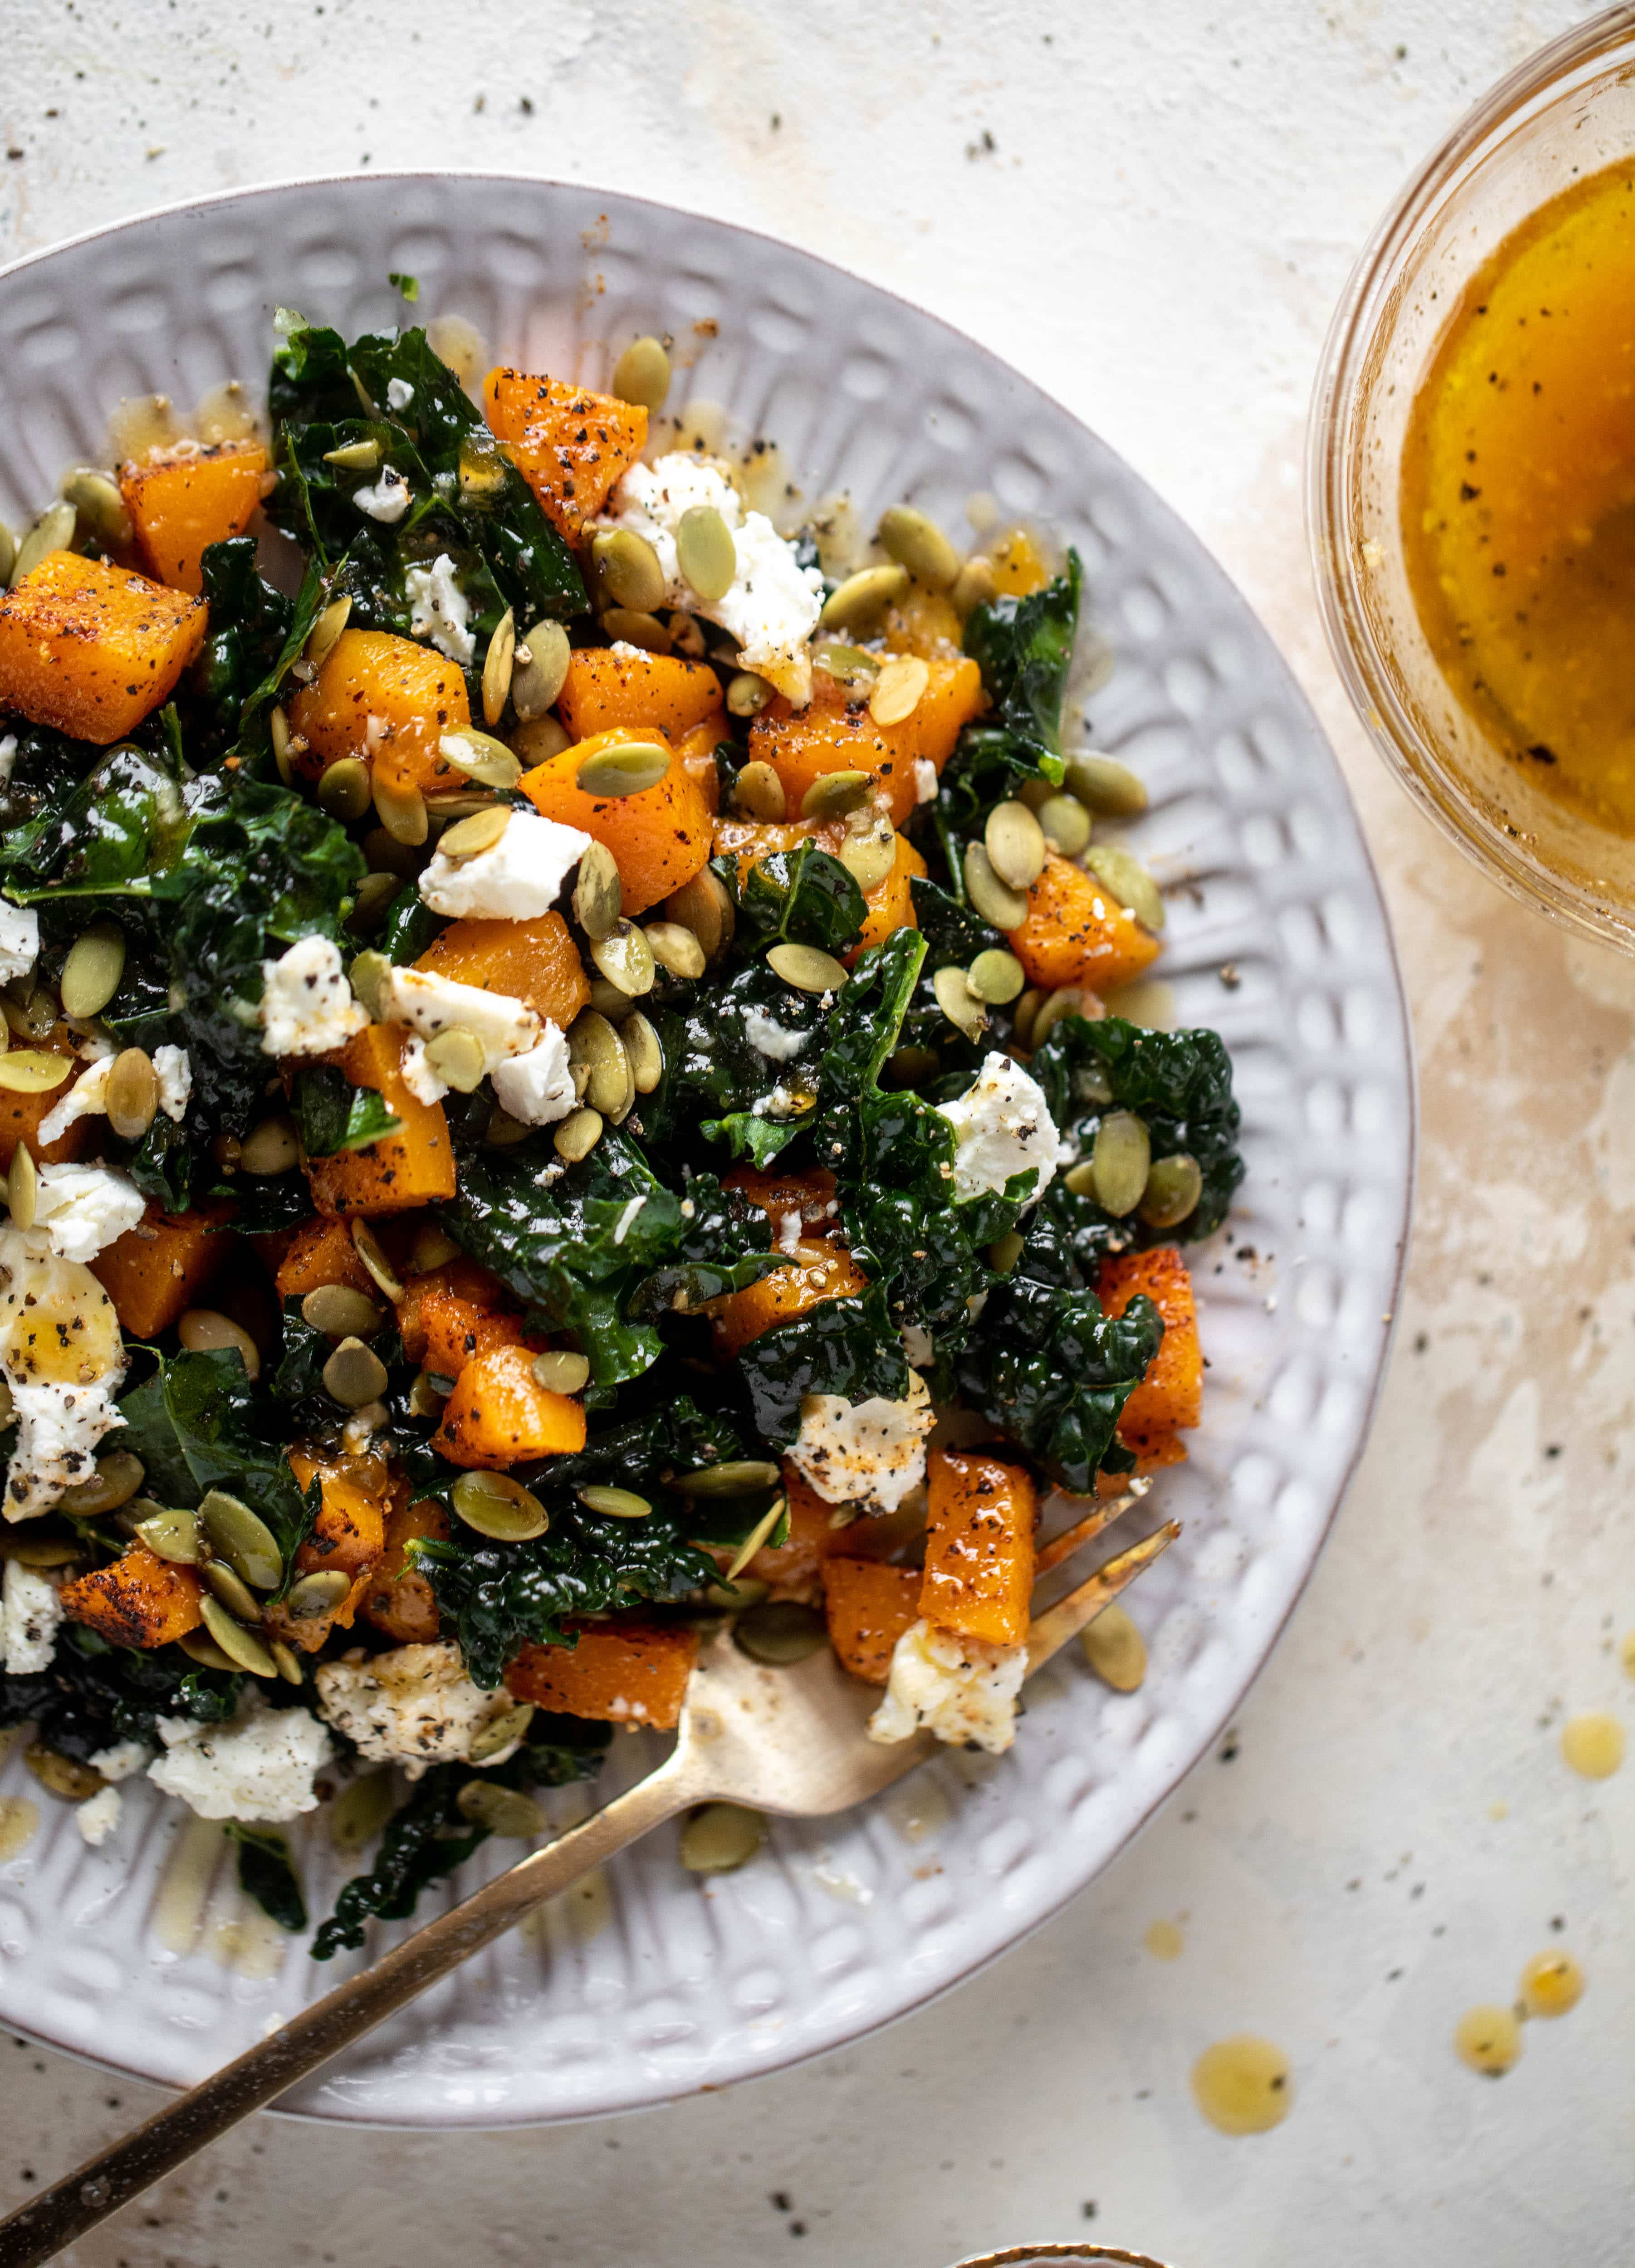 This butternut squash kale salad is so easy and delicious! Roasted, smoky butternut squash, goat cheese, pepitas and apricot vinaigrette.